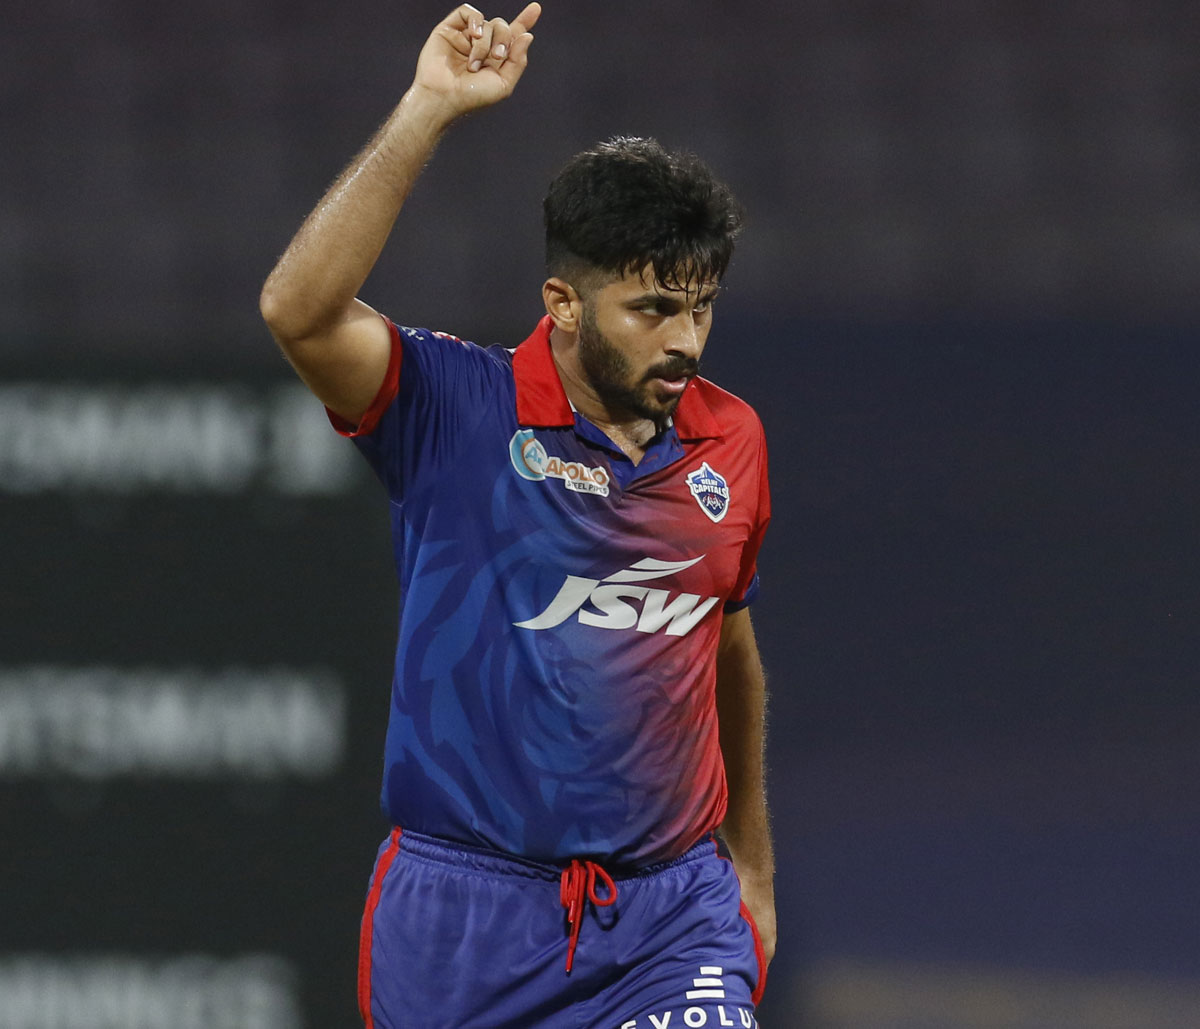 Shardul Thakur is now a Knight Rider